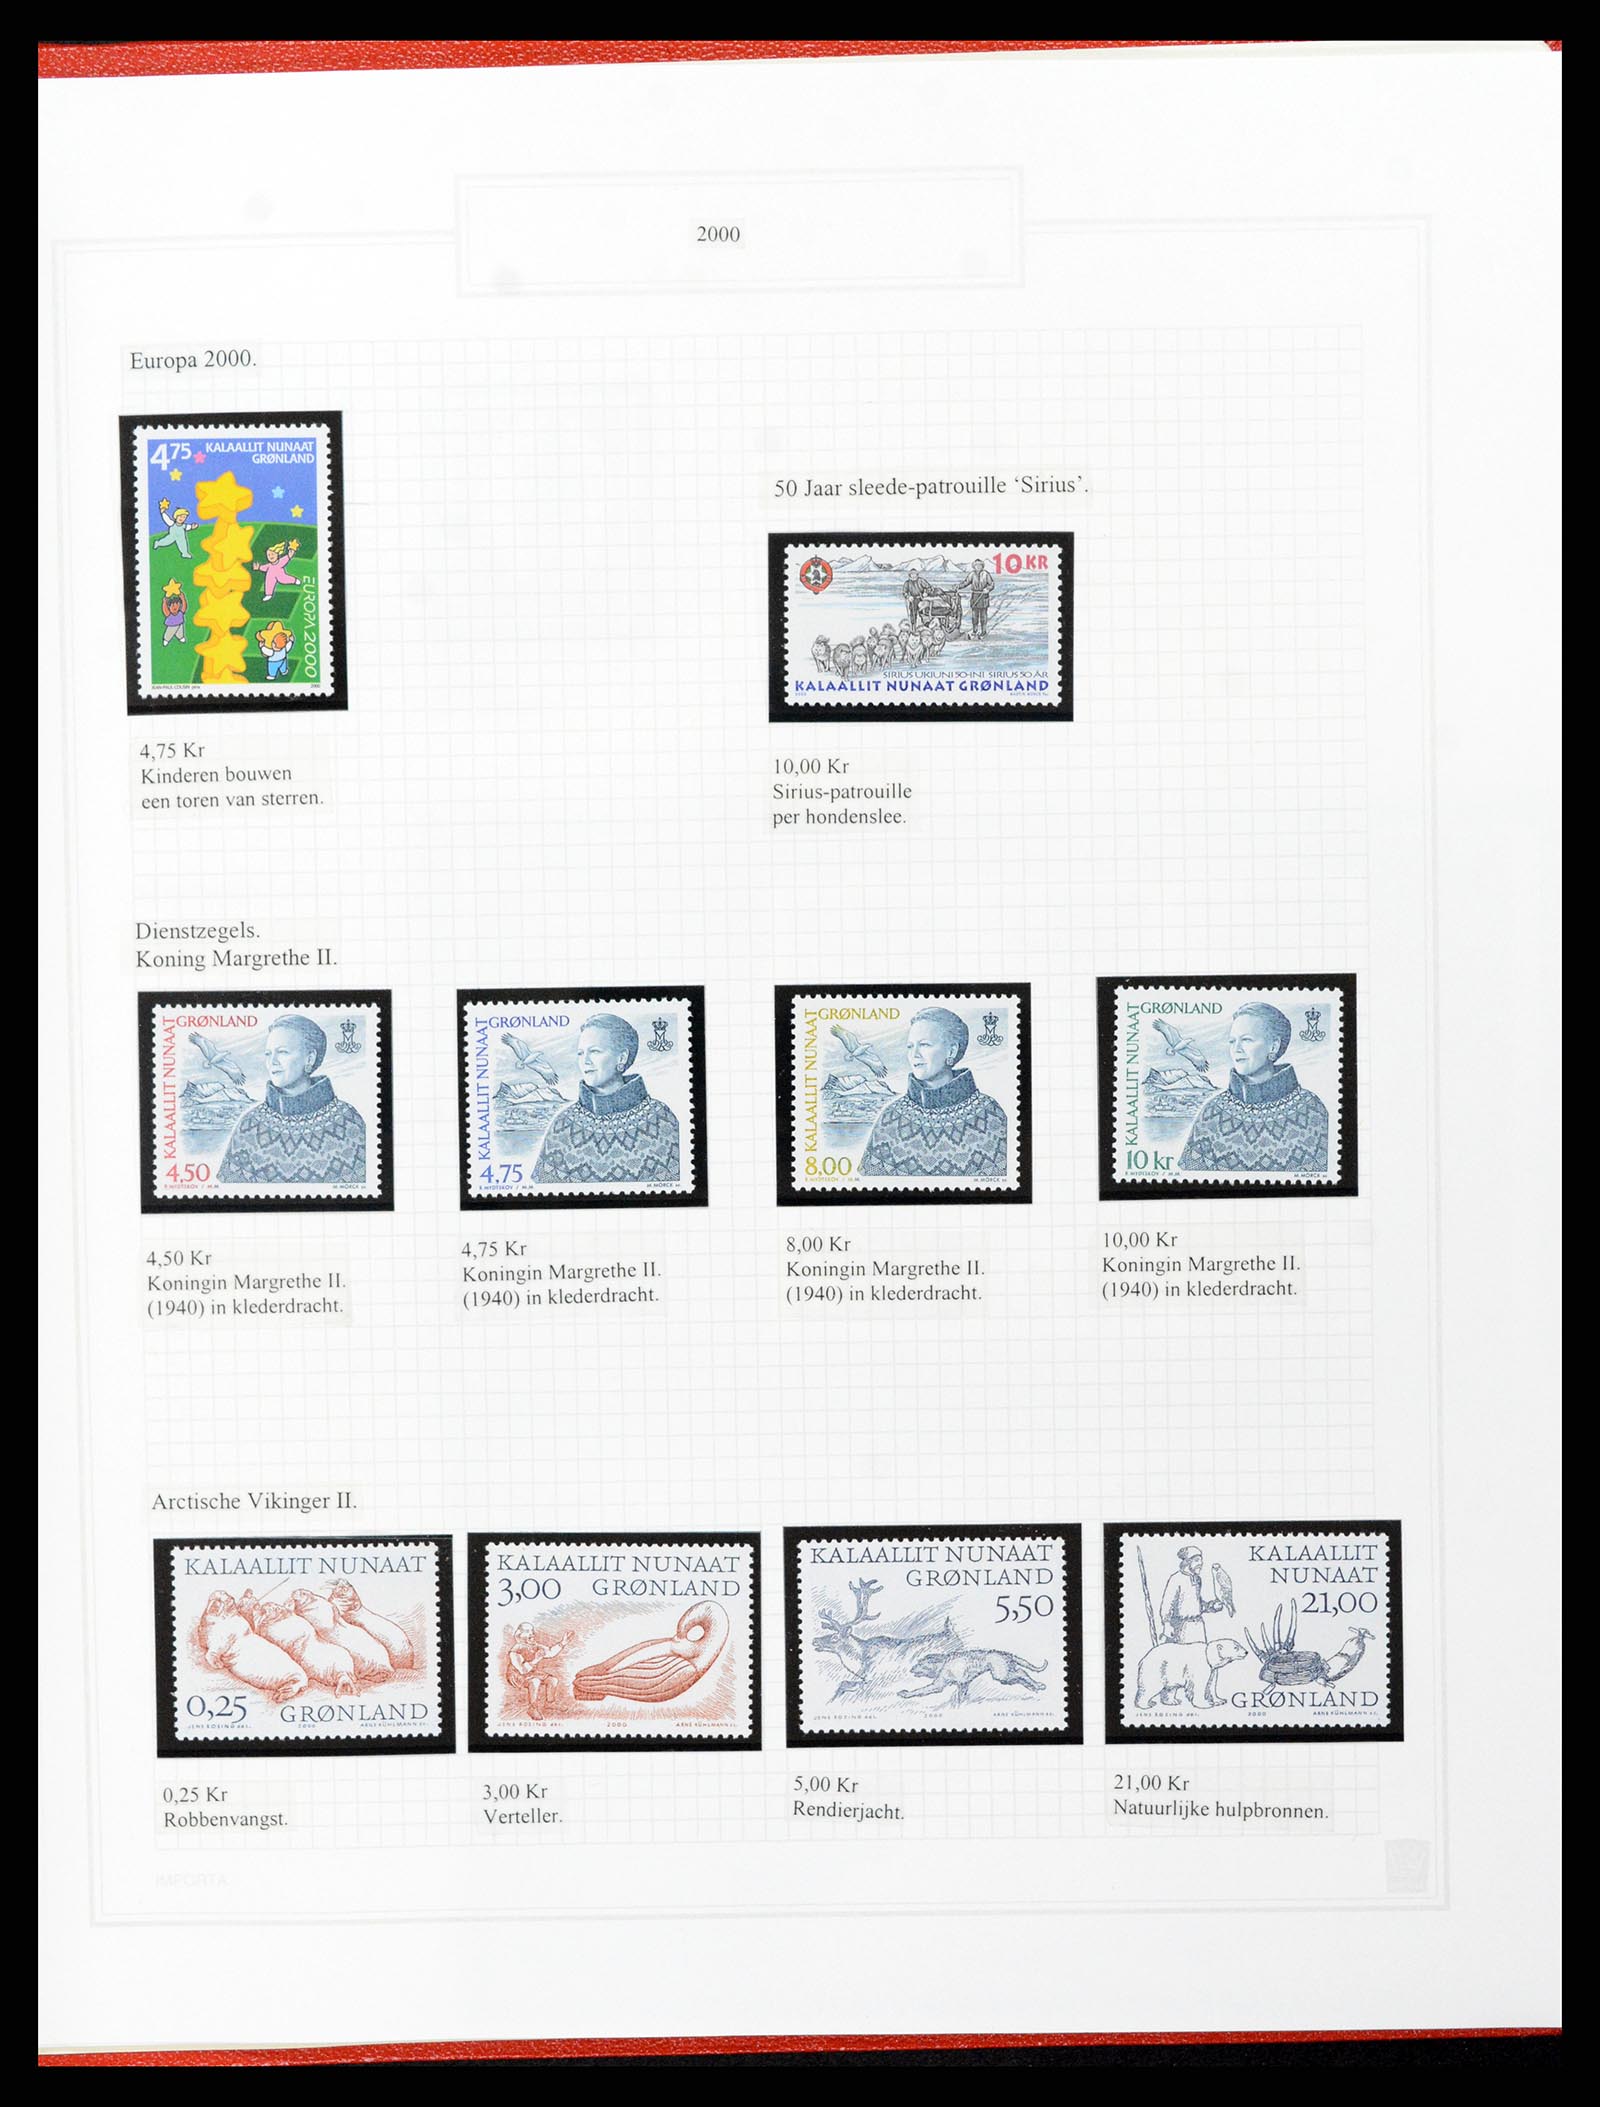 37302 106 - Stamp collection 37302 Greenland and Faroe Islands 1905-2001.